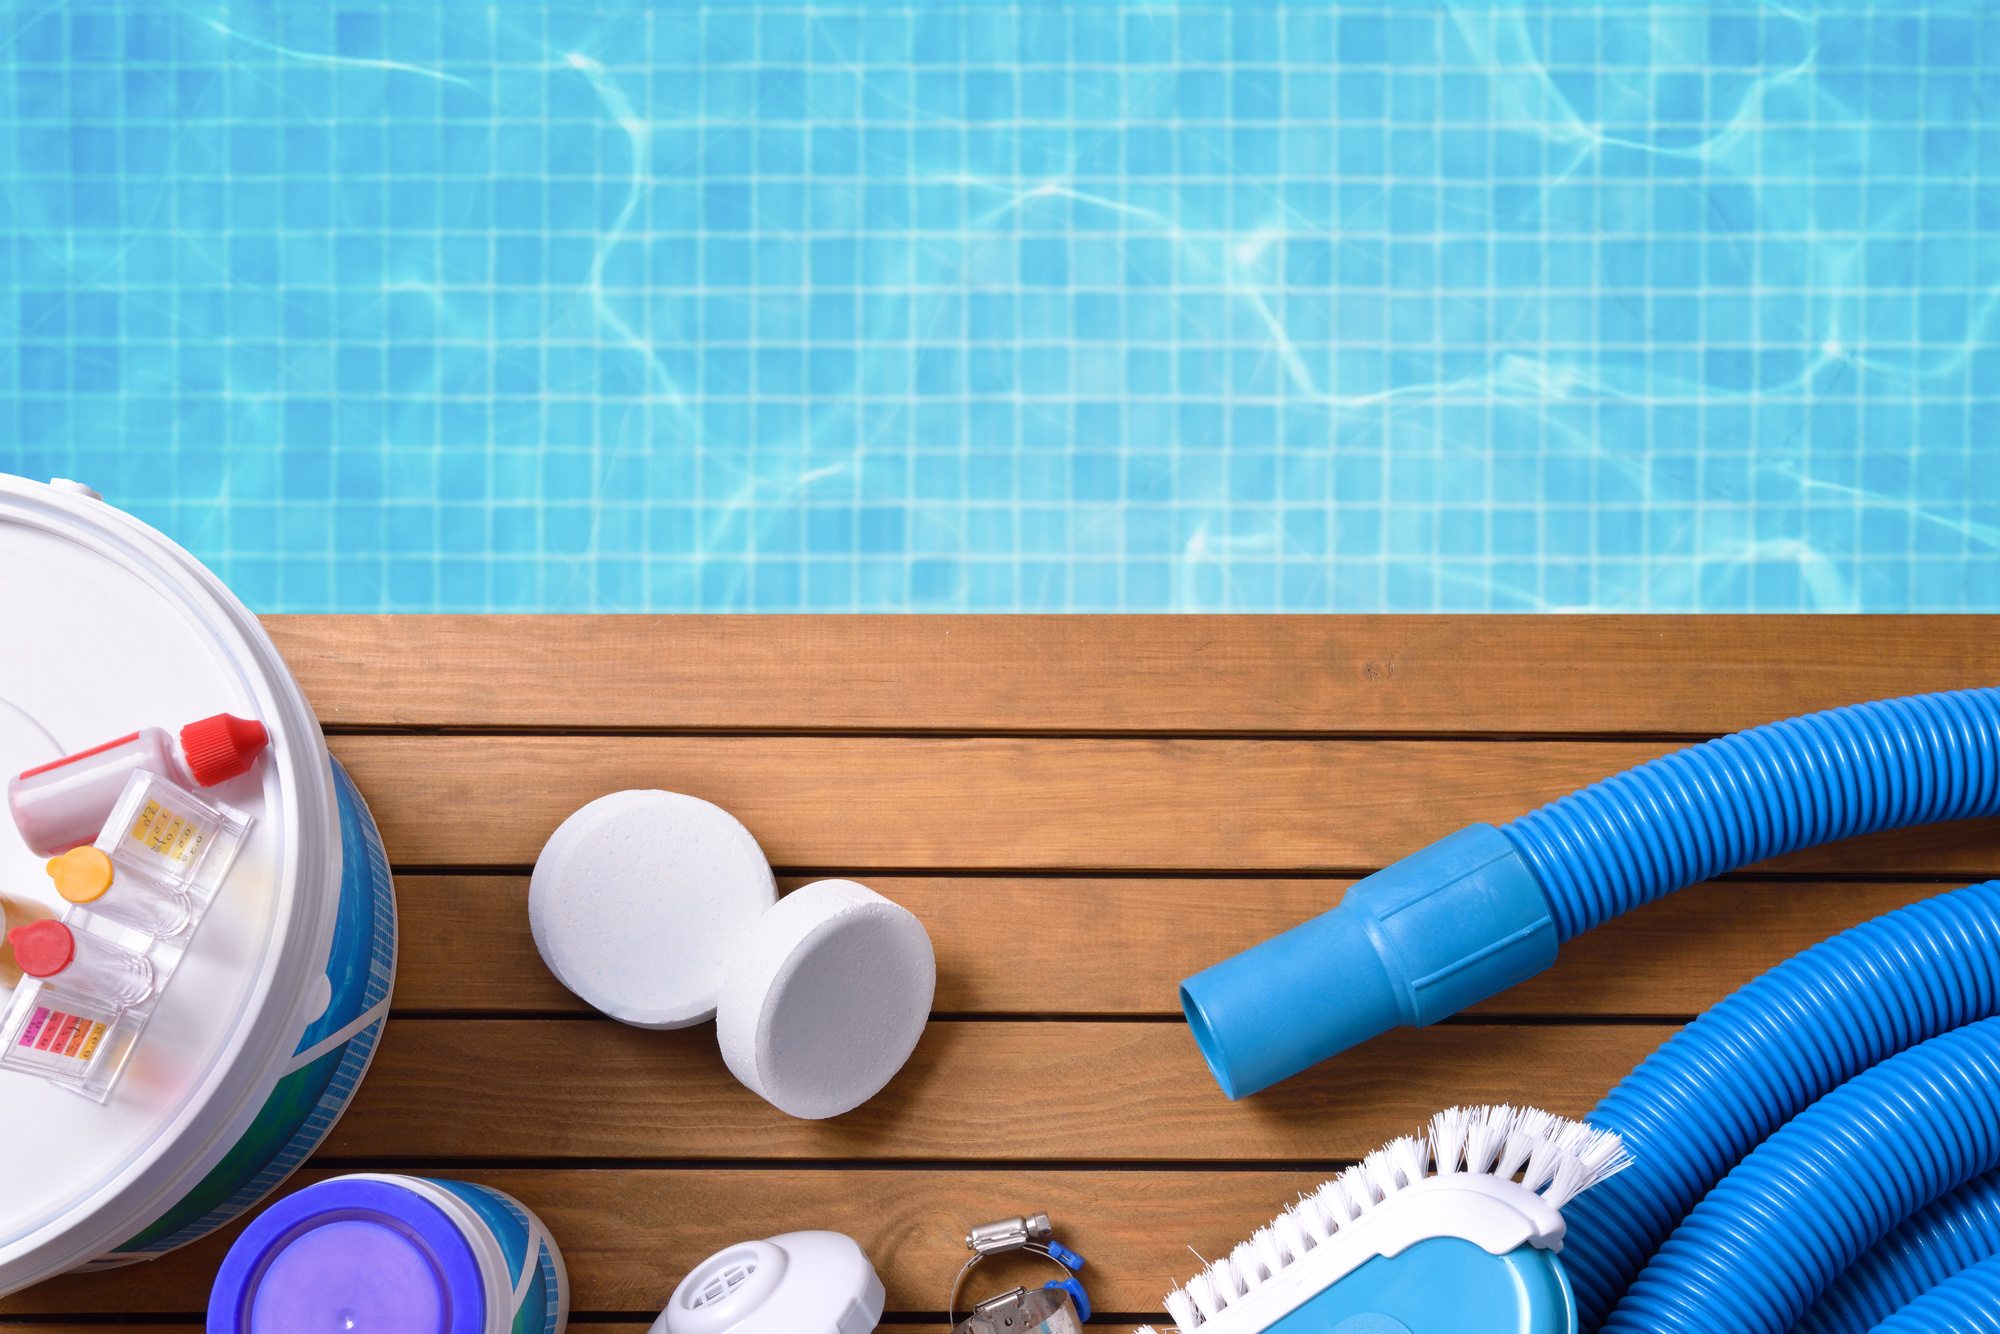 Keeping your facility's swimming pool in good condition requires knowing what not to do. Here are common pool maintenance errors to avoid for your business.